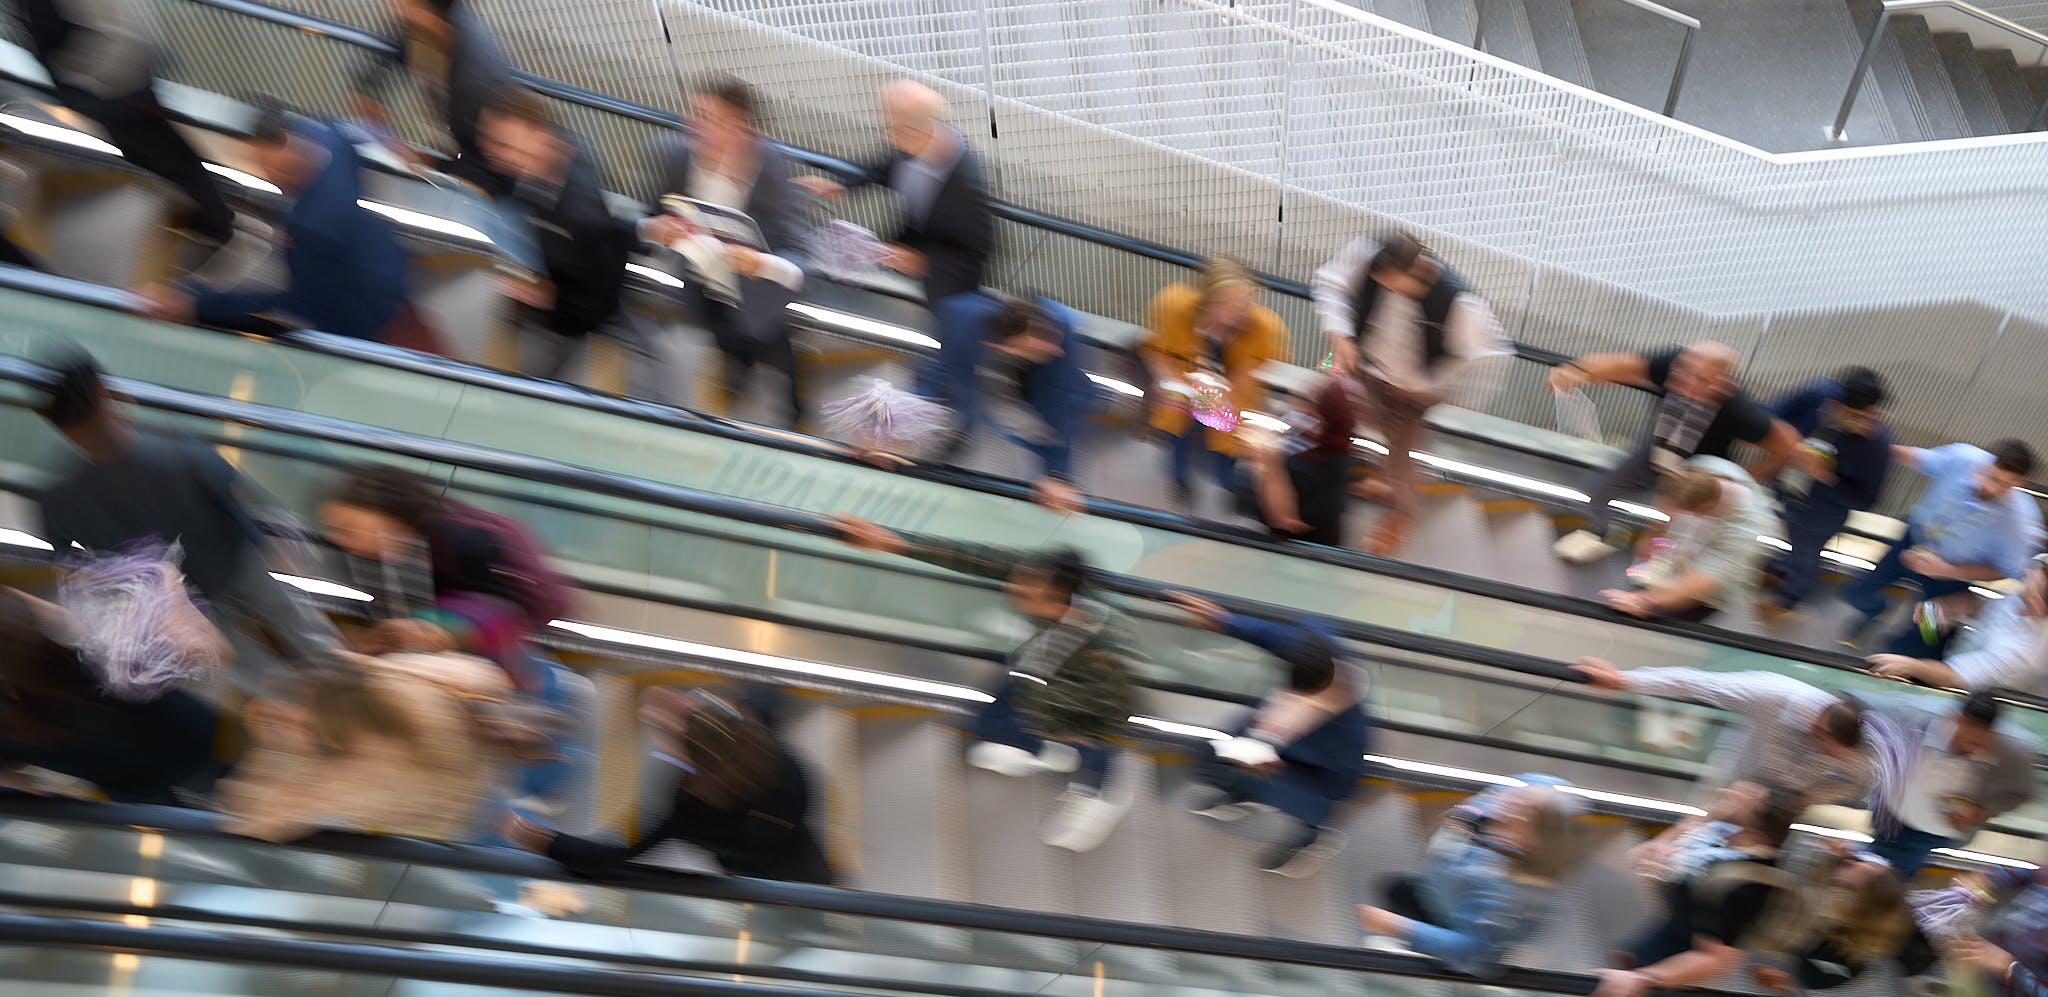 Blurry image of people riding up an escalator